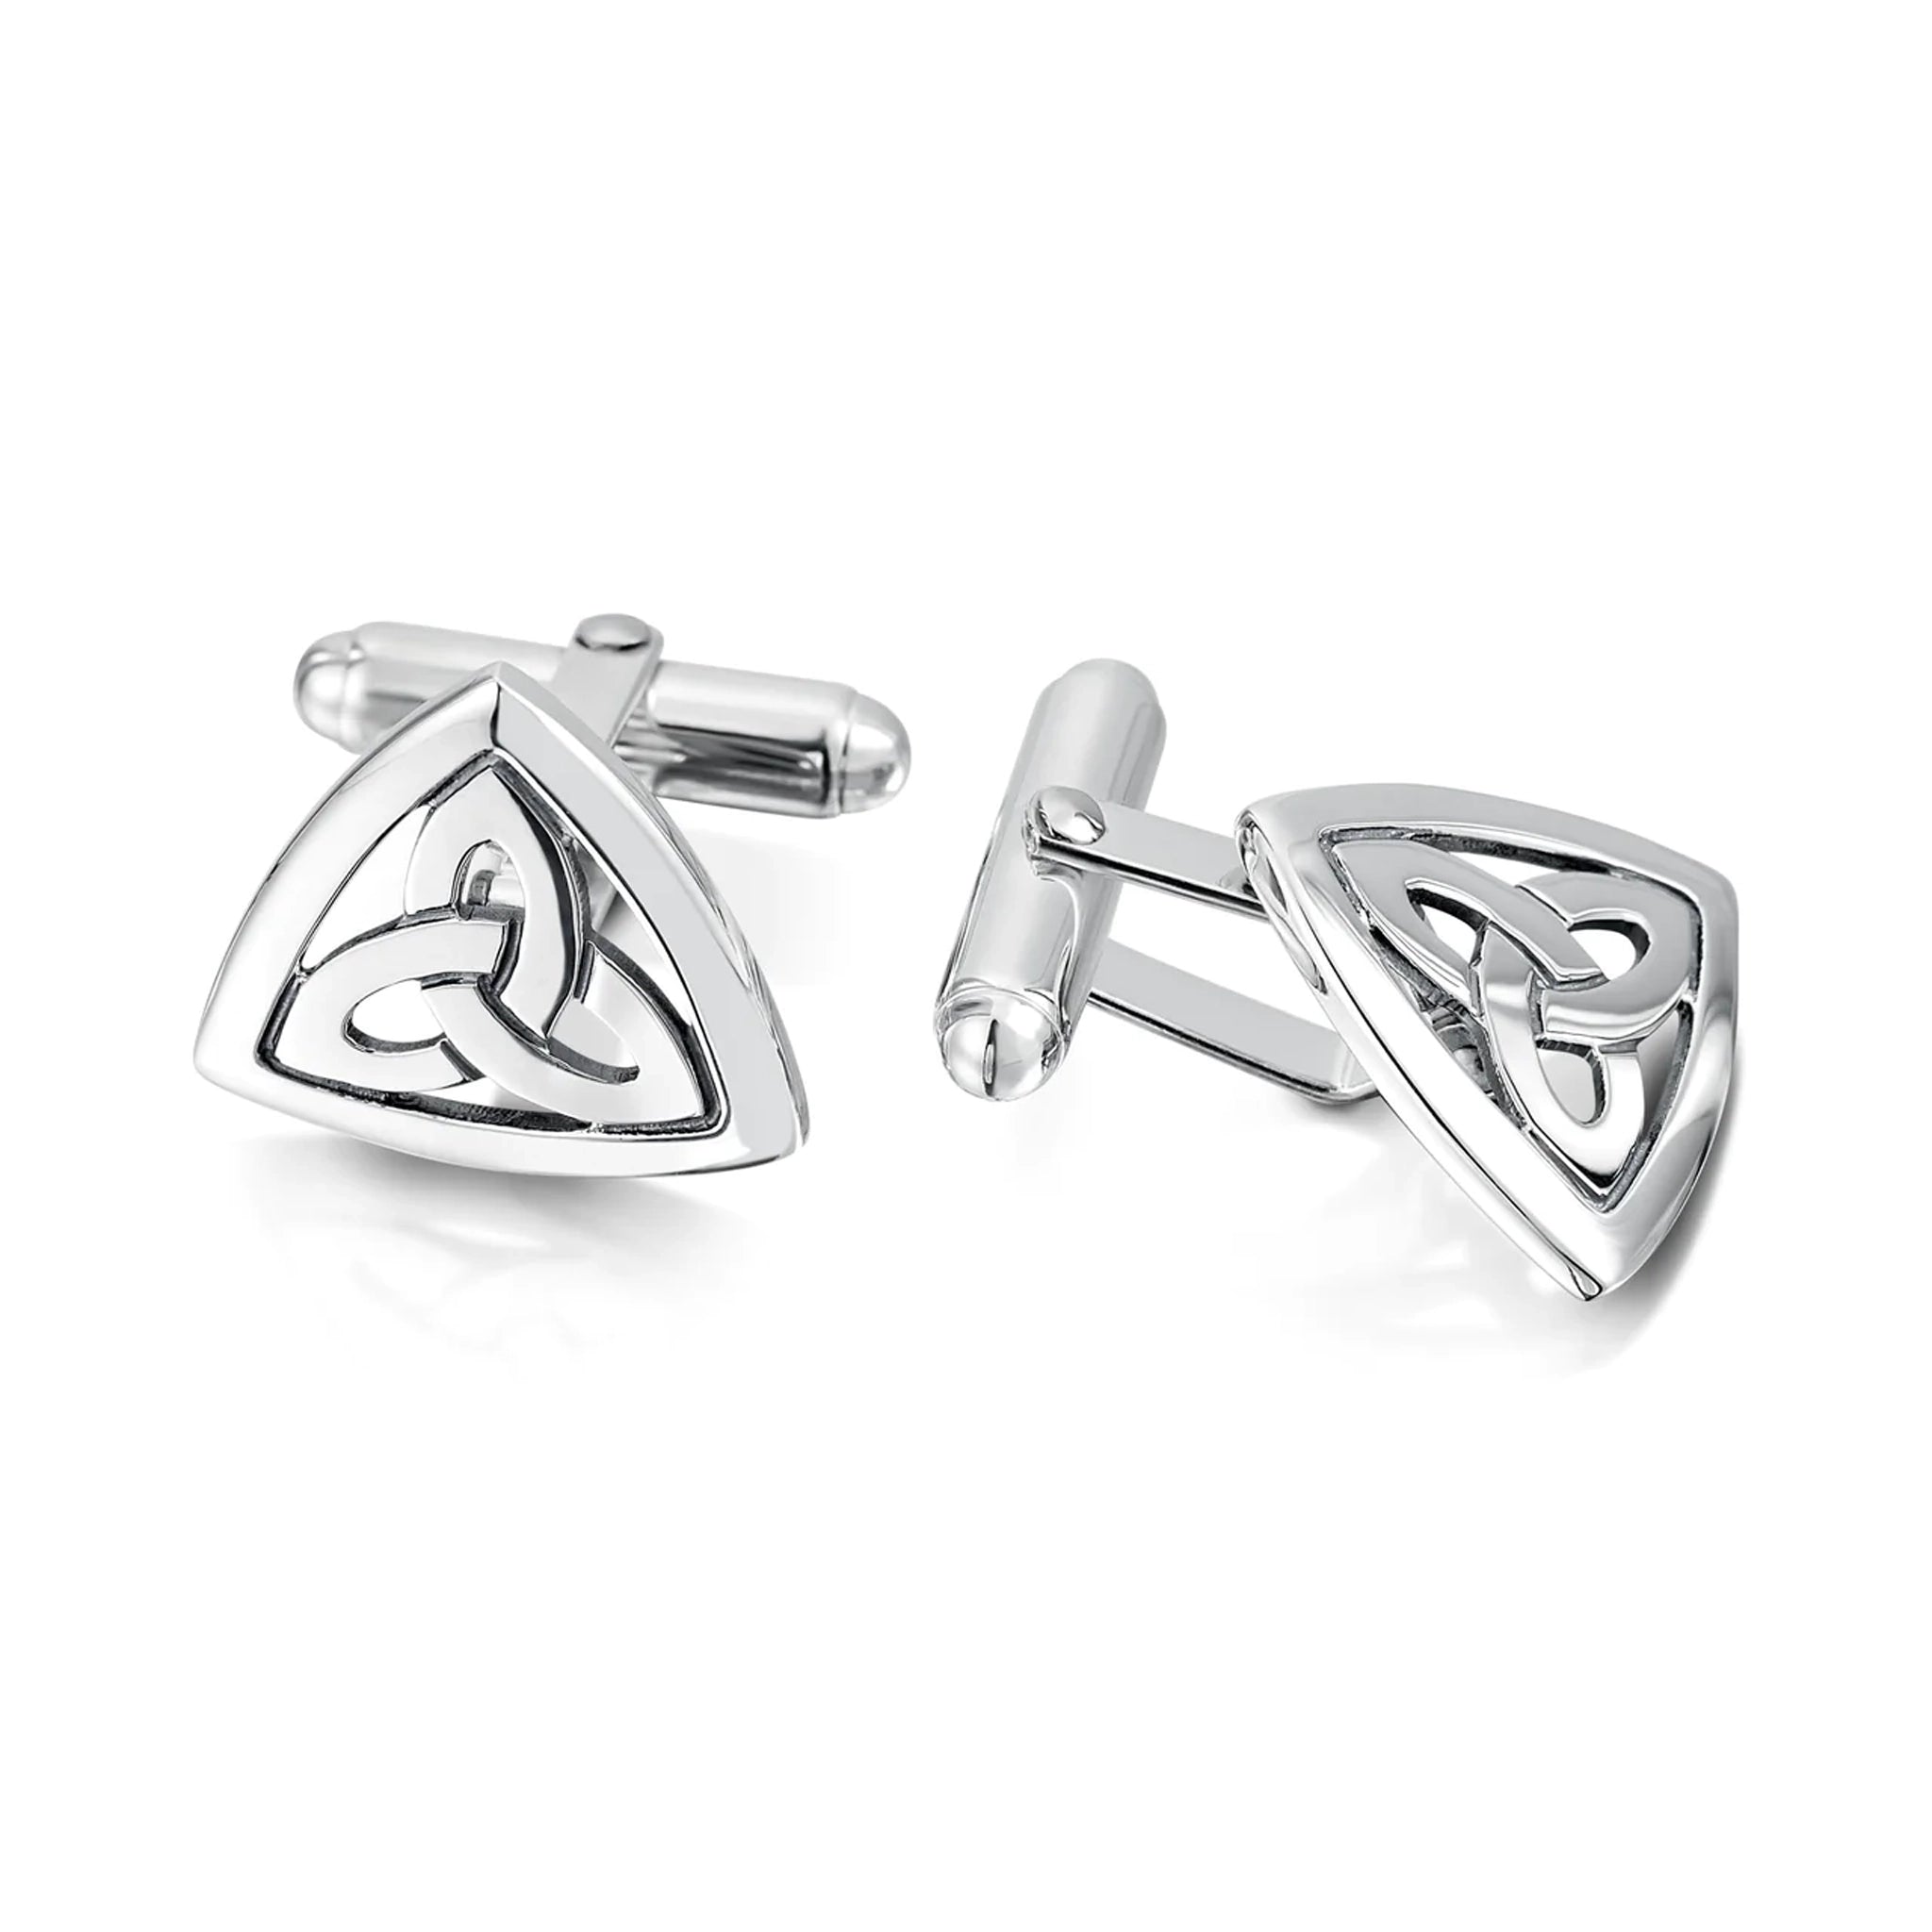 Pair of triangular silver cufflinks with T-bar clasps and trinity knots in the centres